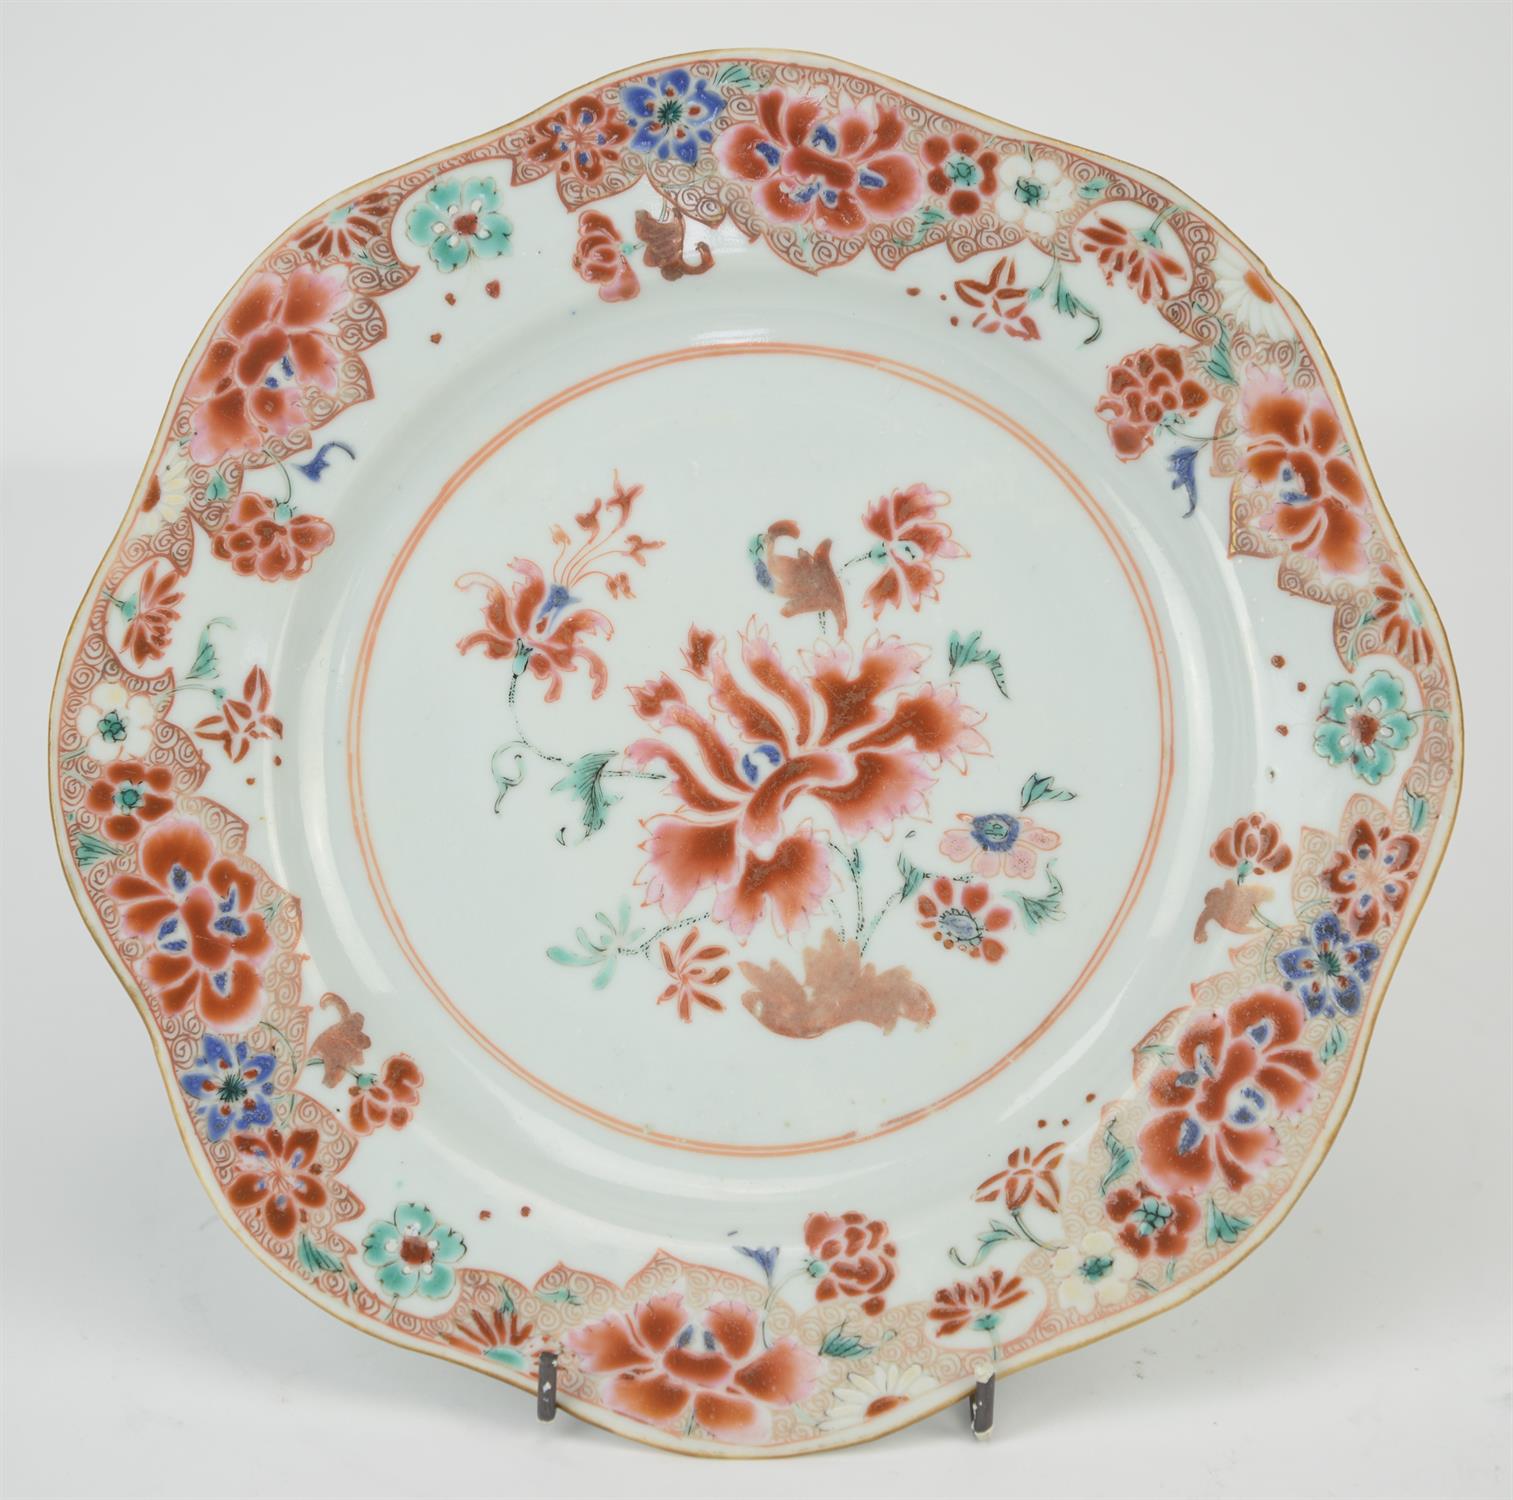 Eight famille rose dishes; each one decorated with floral designs and about 22.5 cm diameter, - Image 12 of 28